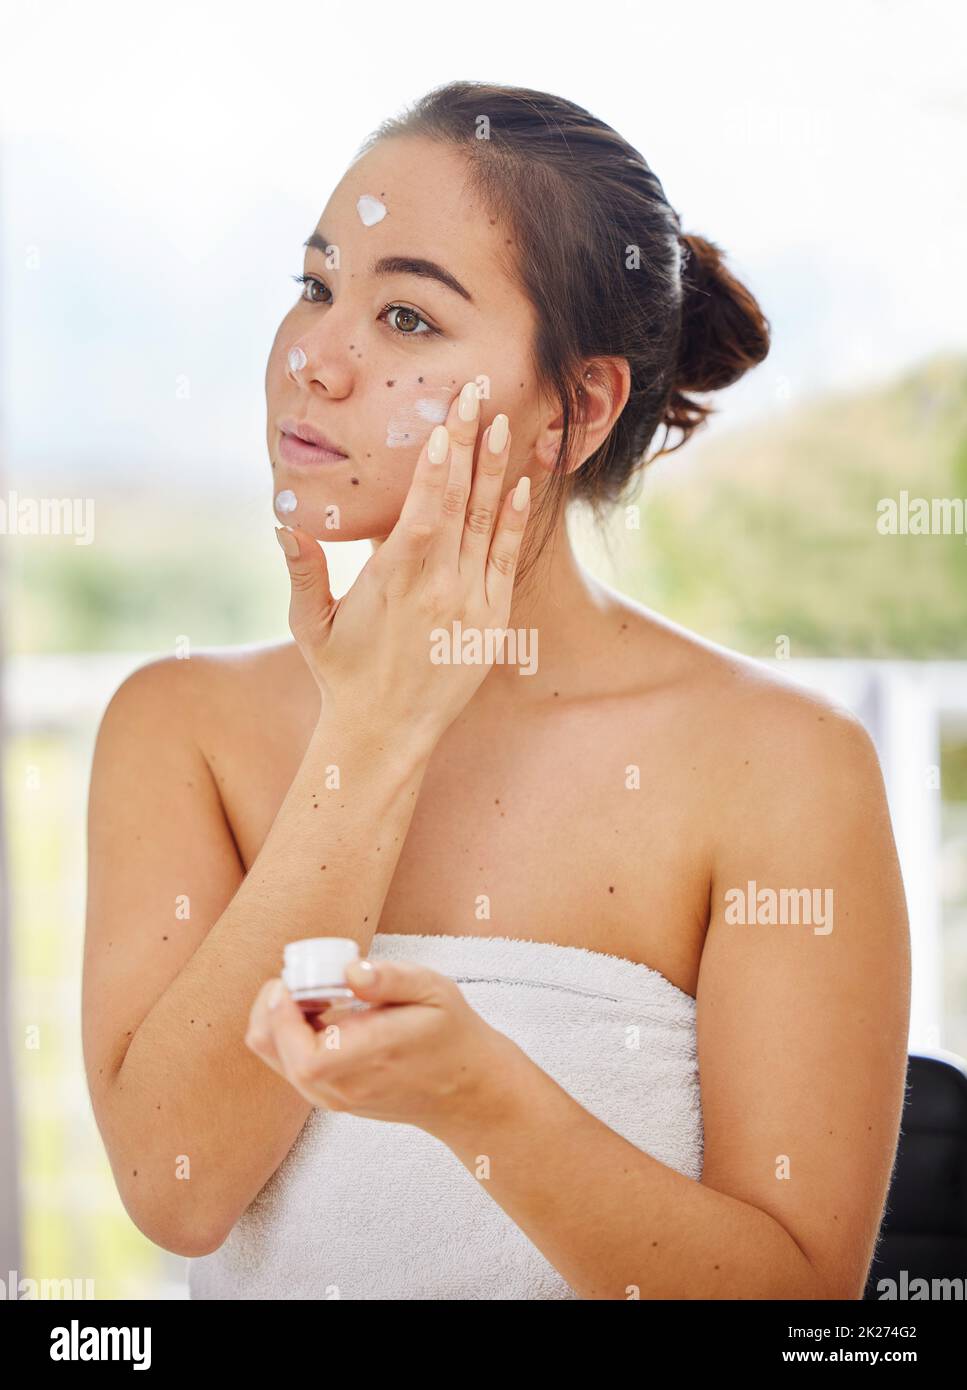 Keeping my face moisturised all day. Shot of a young woman applying moisturiser to her face during her morning beauty routine. Stock Photo